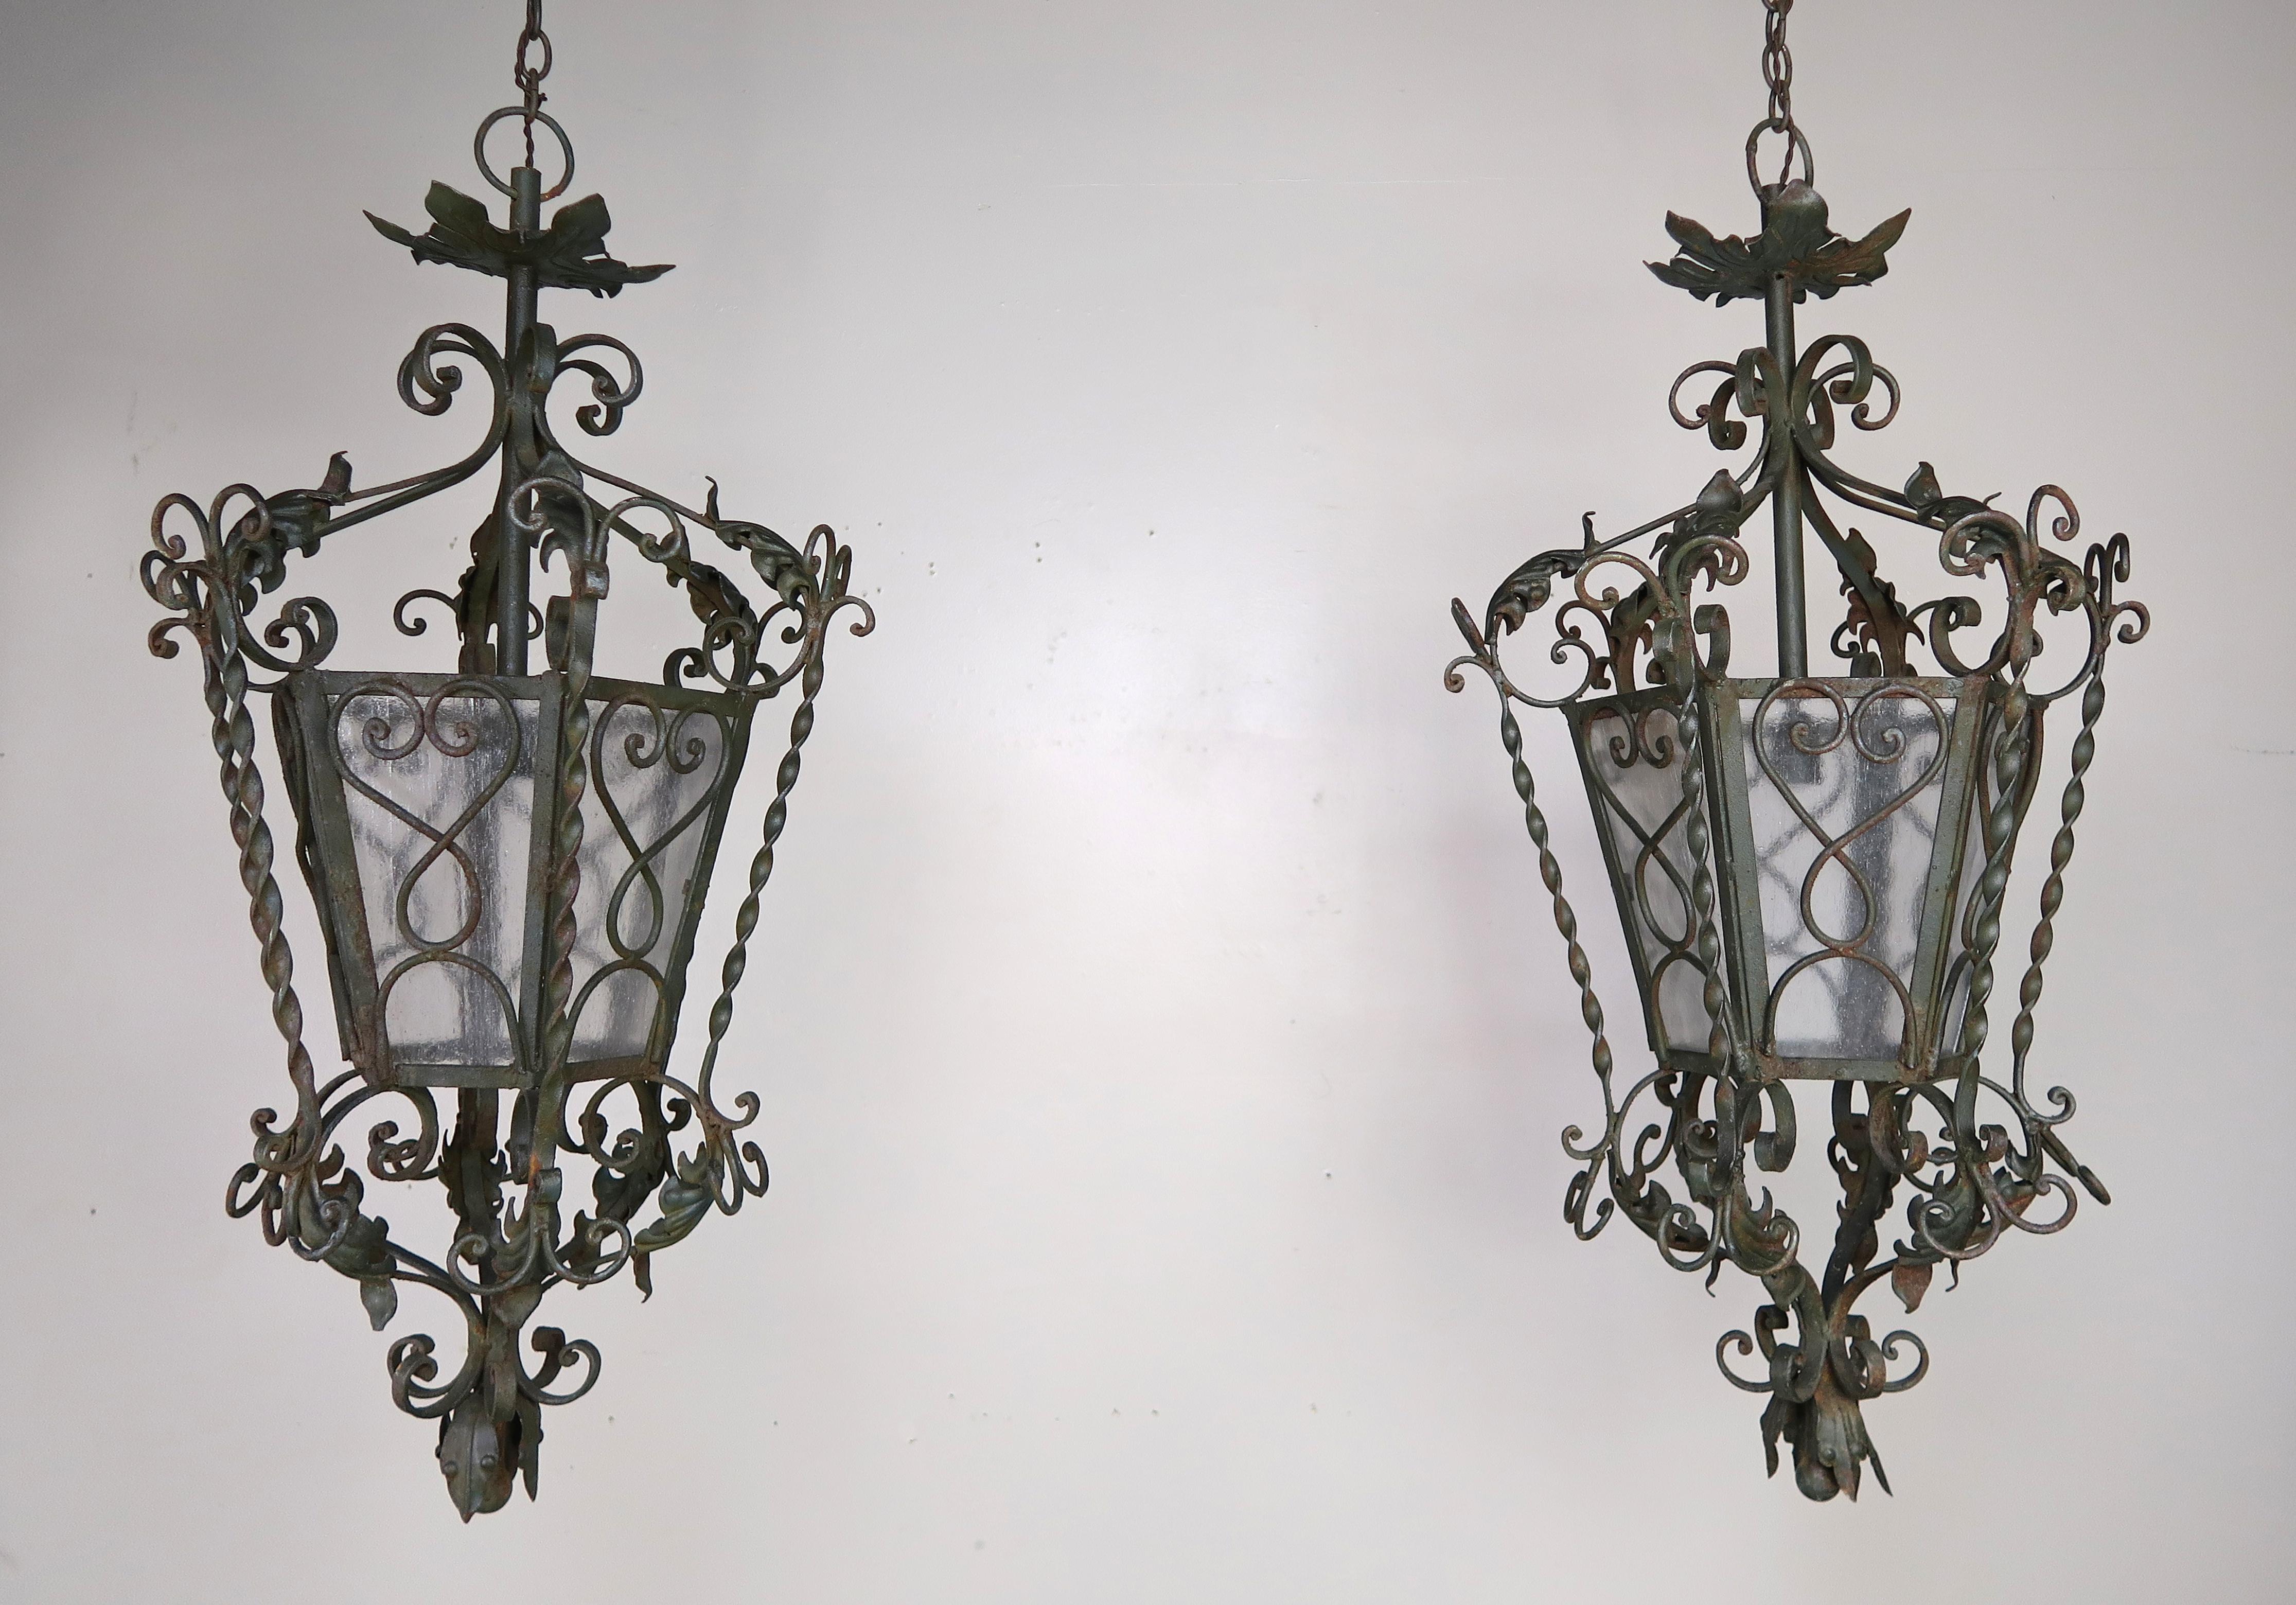 Pair of Spanish six sided handwrought iron and glass lanterns with beautiful ornate details throughout. The lanterns are both newly rewired and include chain and canopy. Ready to install.